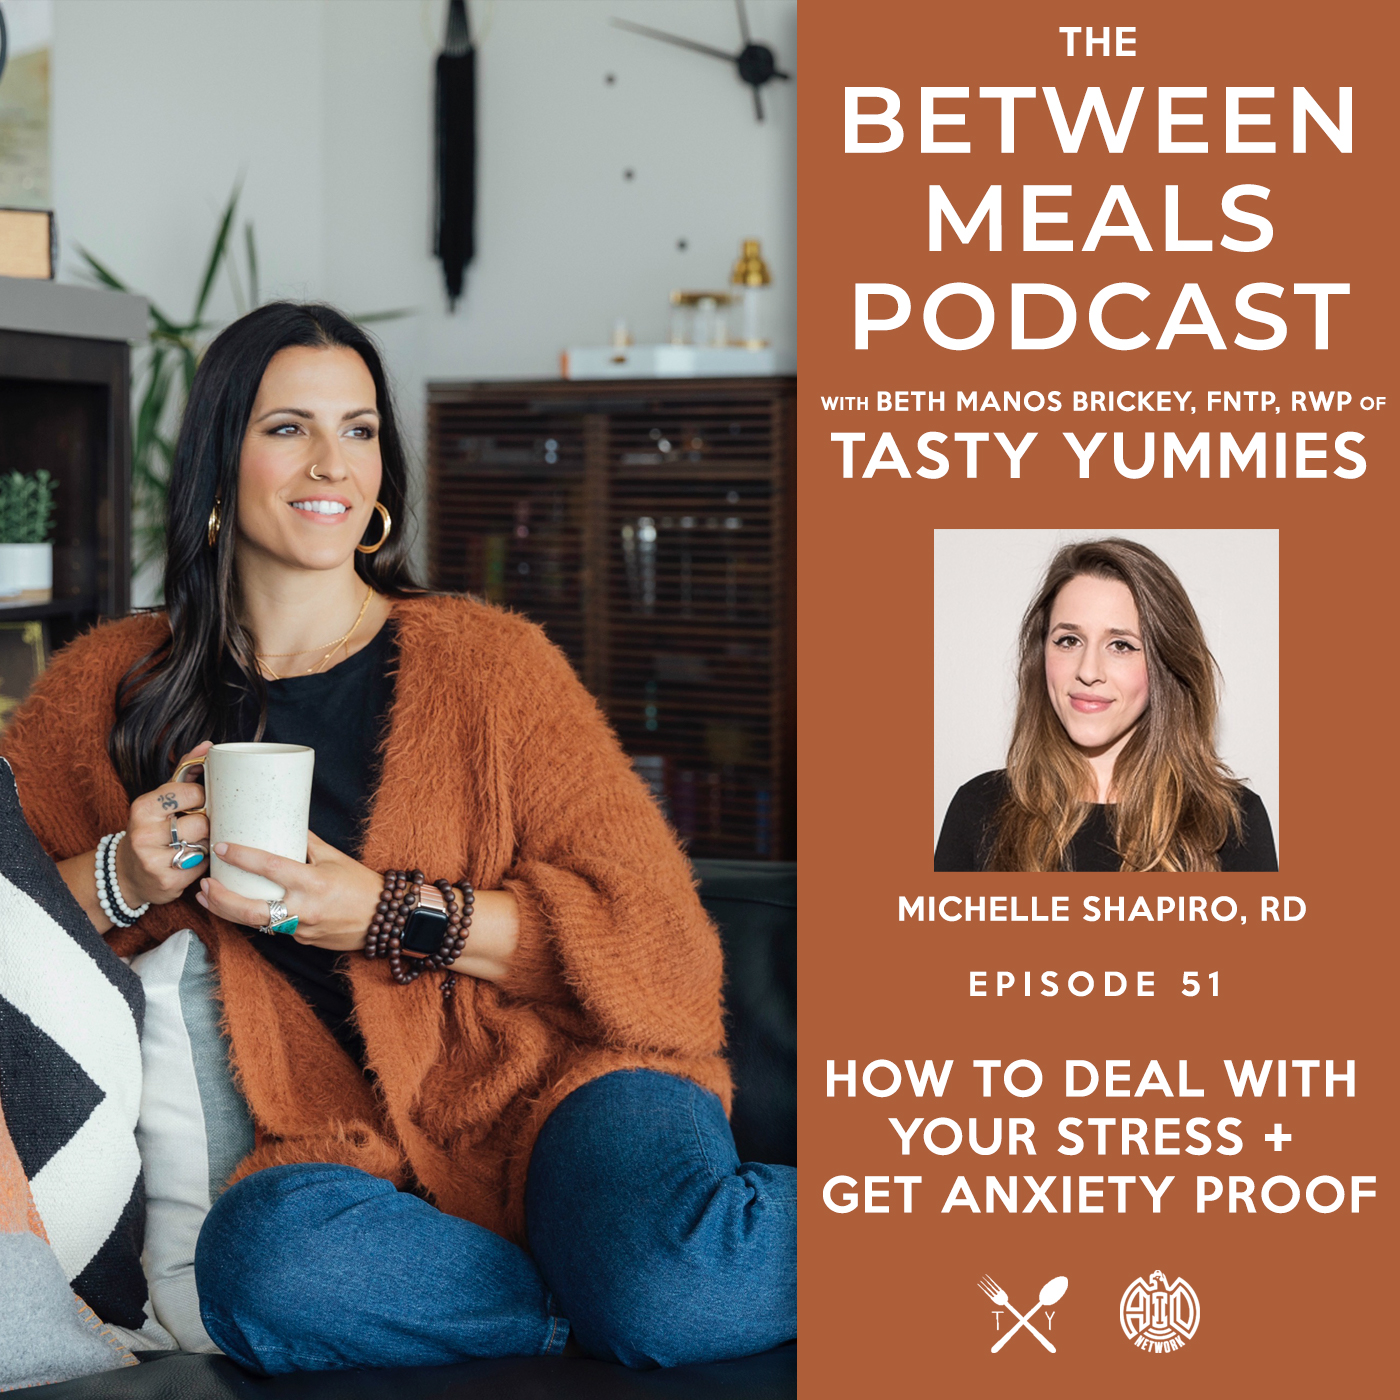 Between Meals Podcast. Episode 51: How to Deal with Your Stress + Get Anxiety Proof